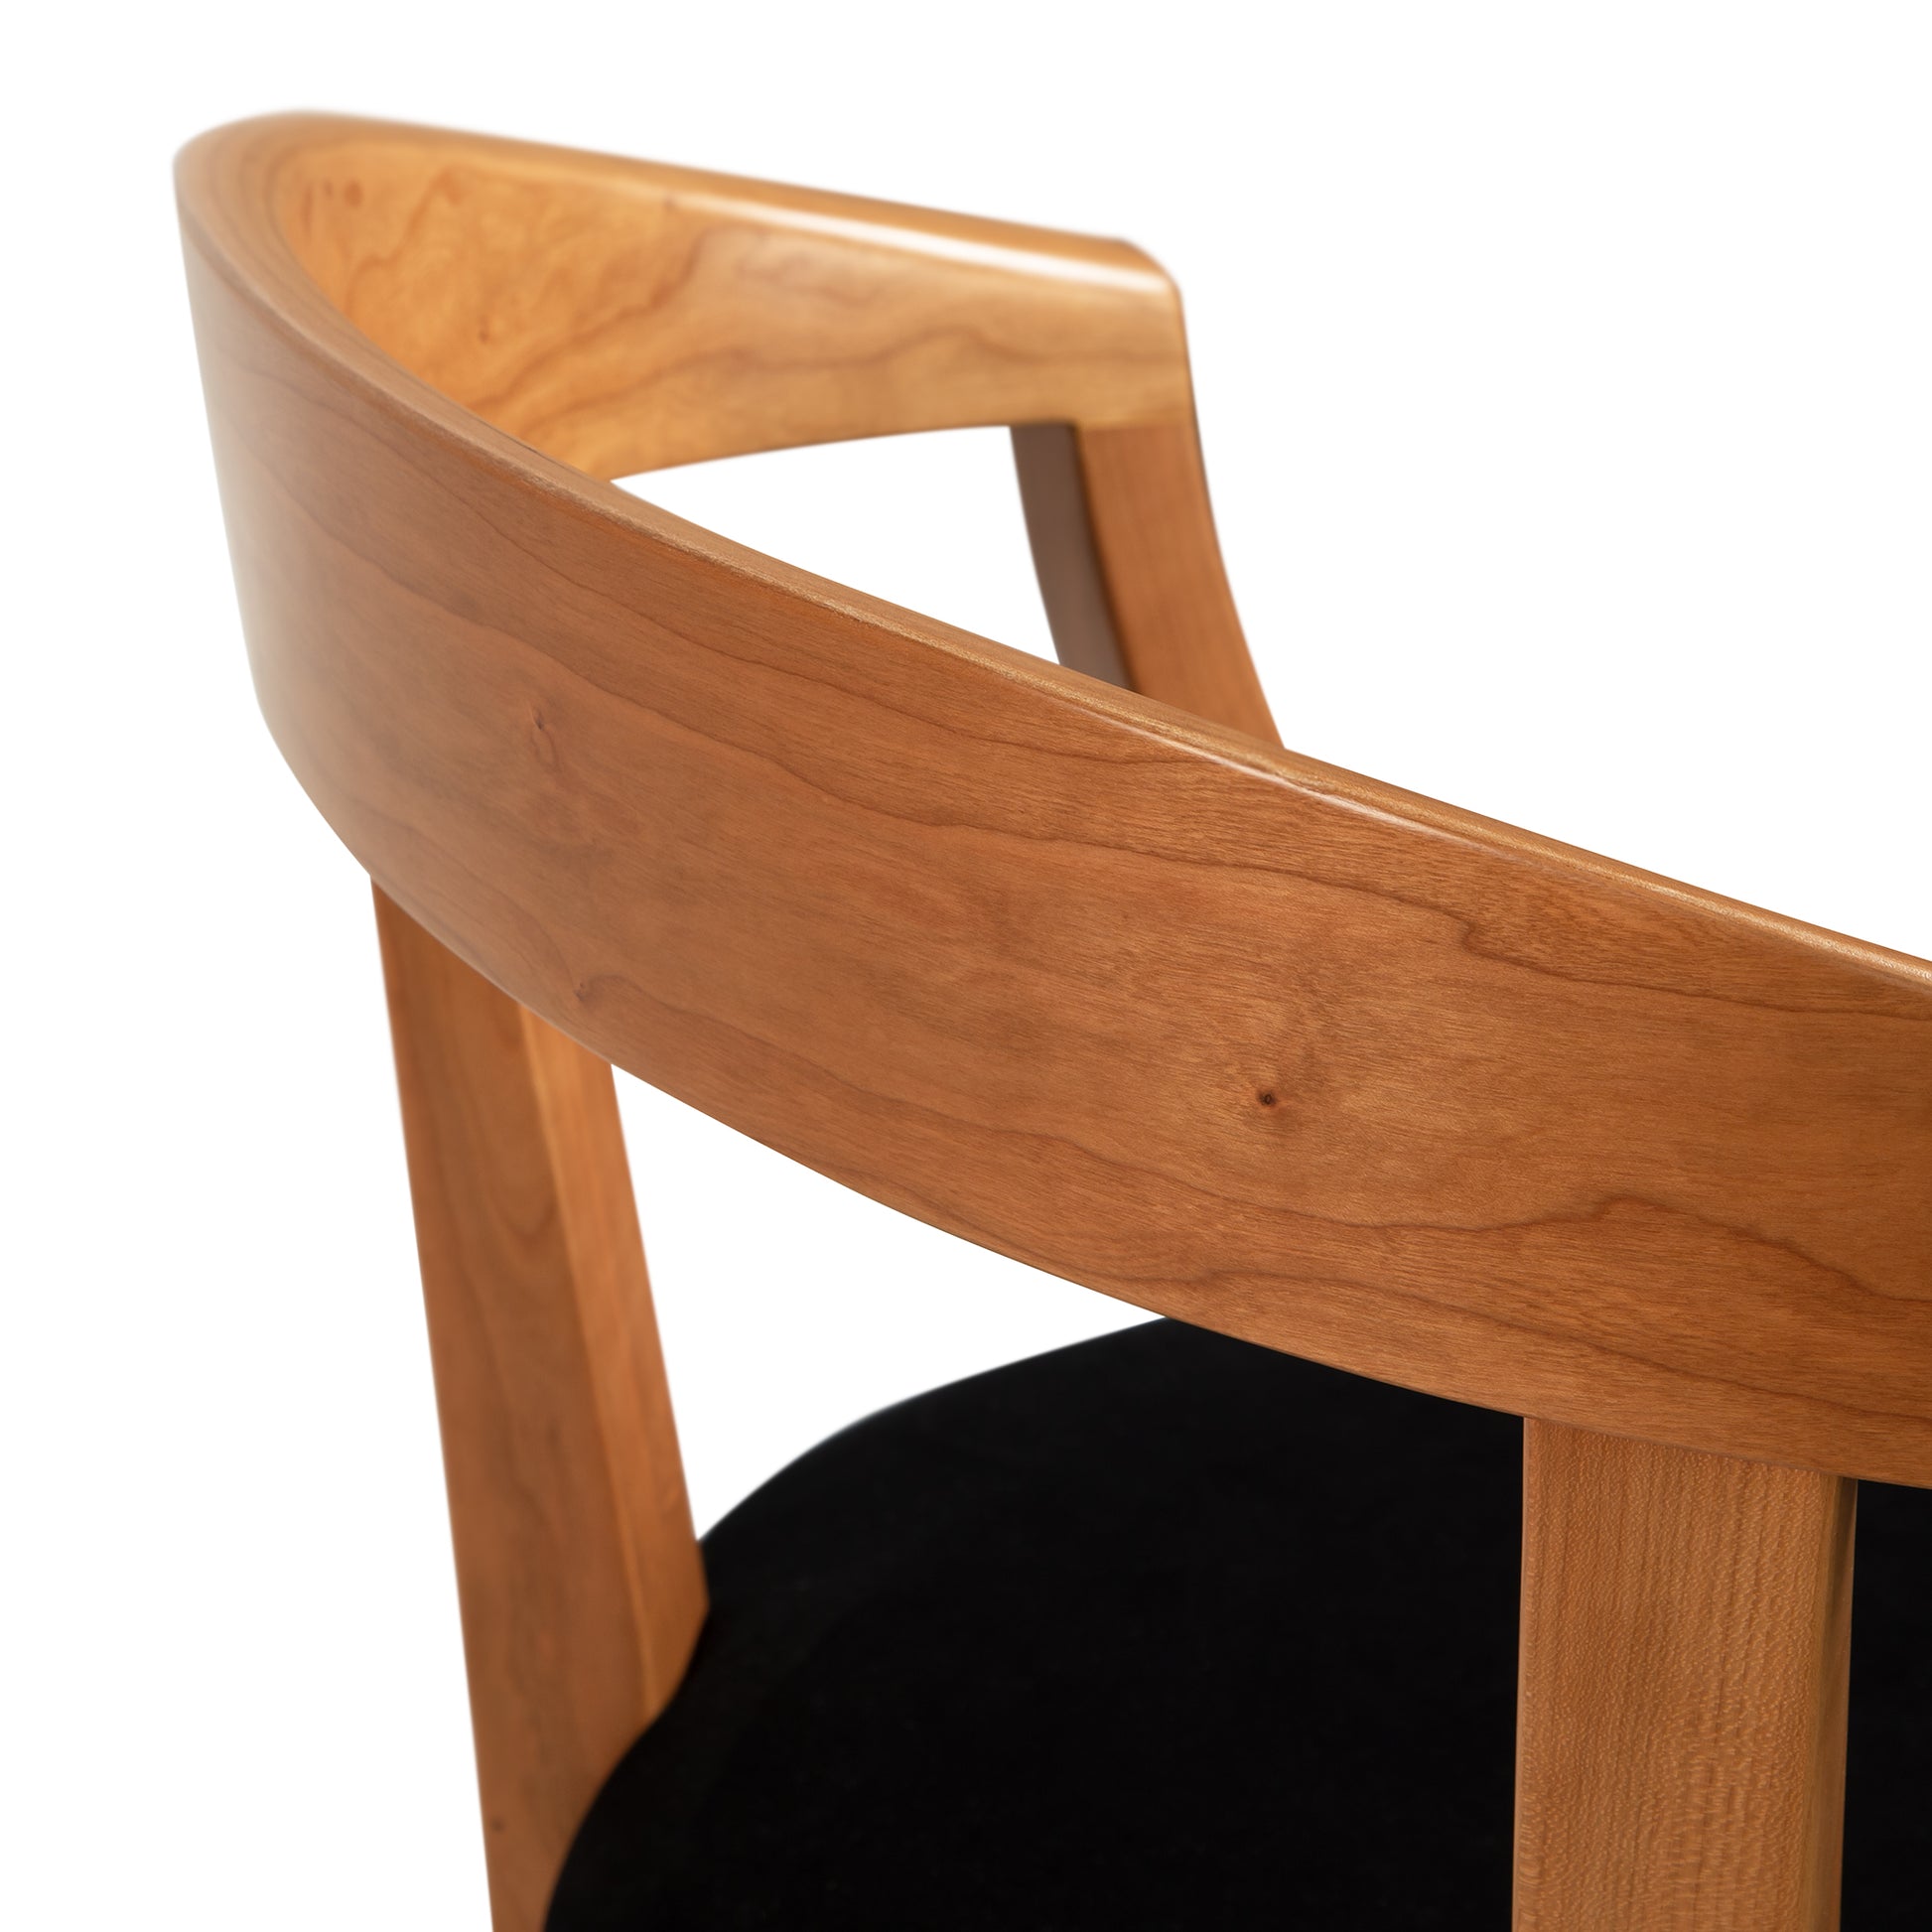 A close up of a wooden chair with a black velvet seat.